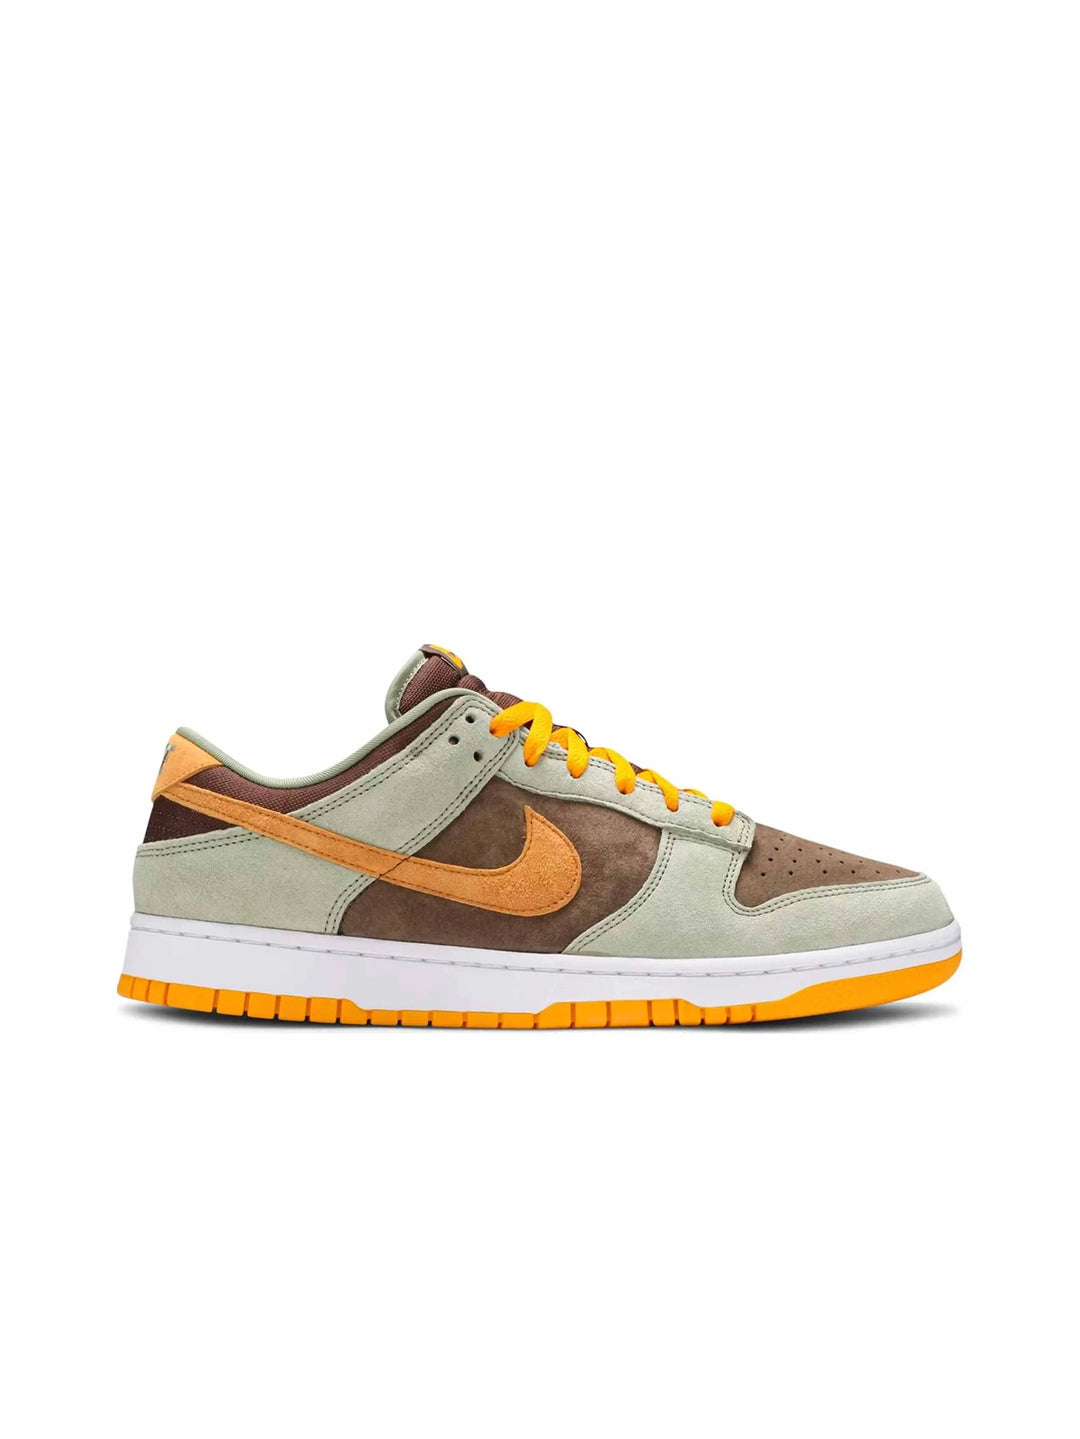 Nike Dunk Low Dusty Olive in Auckland, New Zealand - Shop name